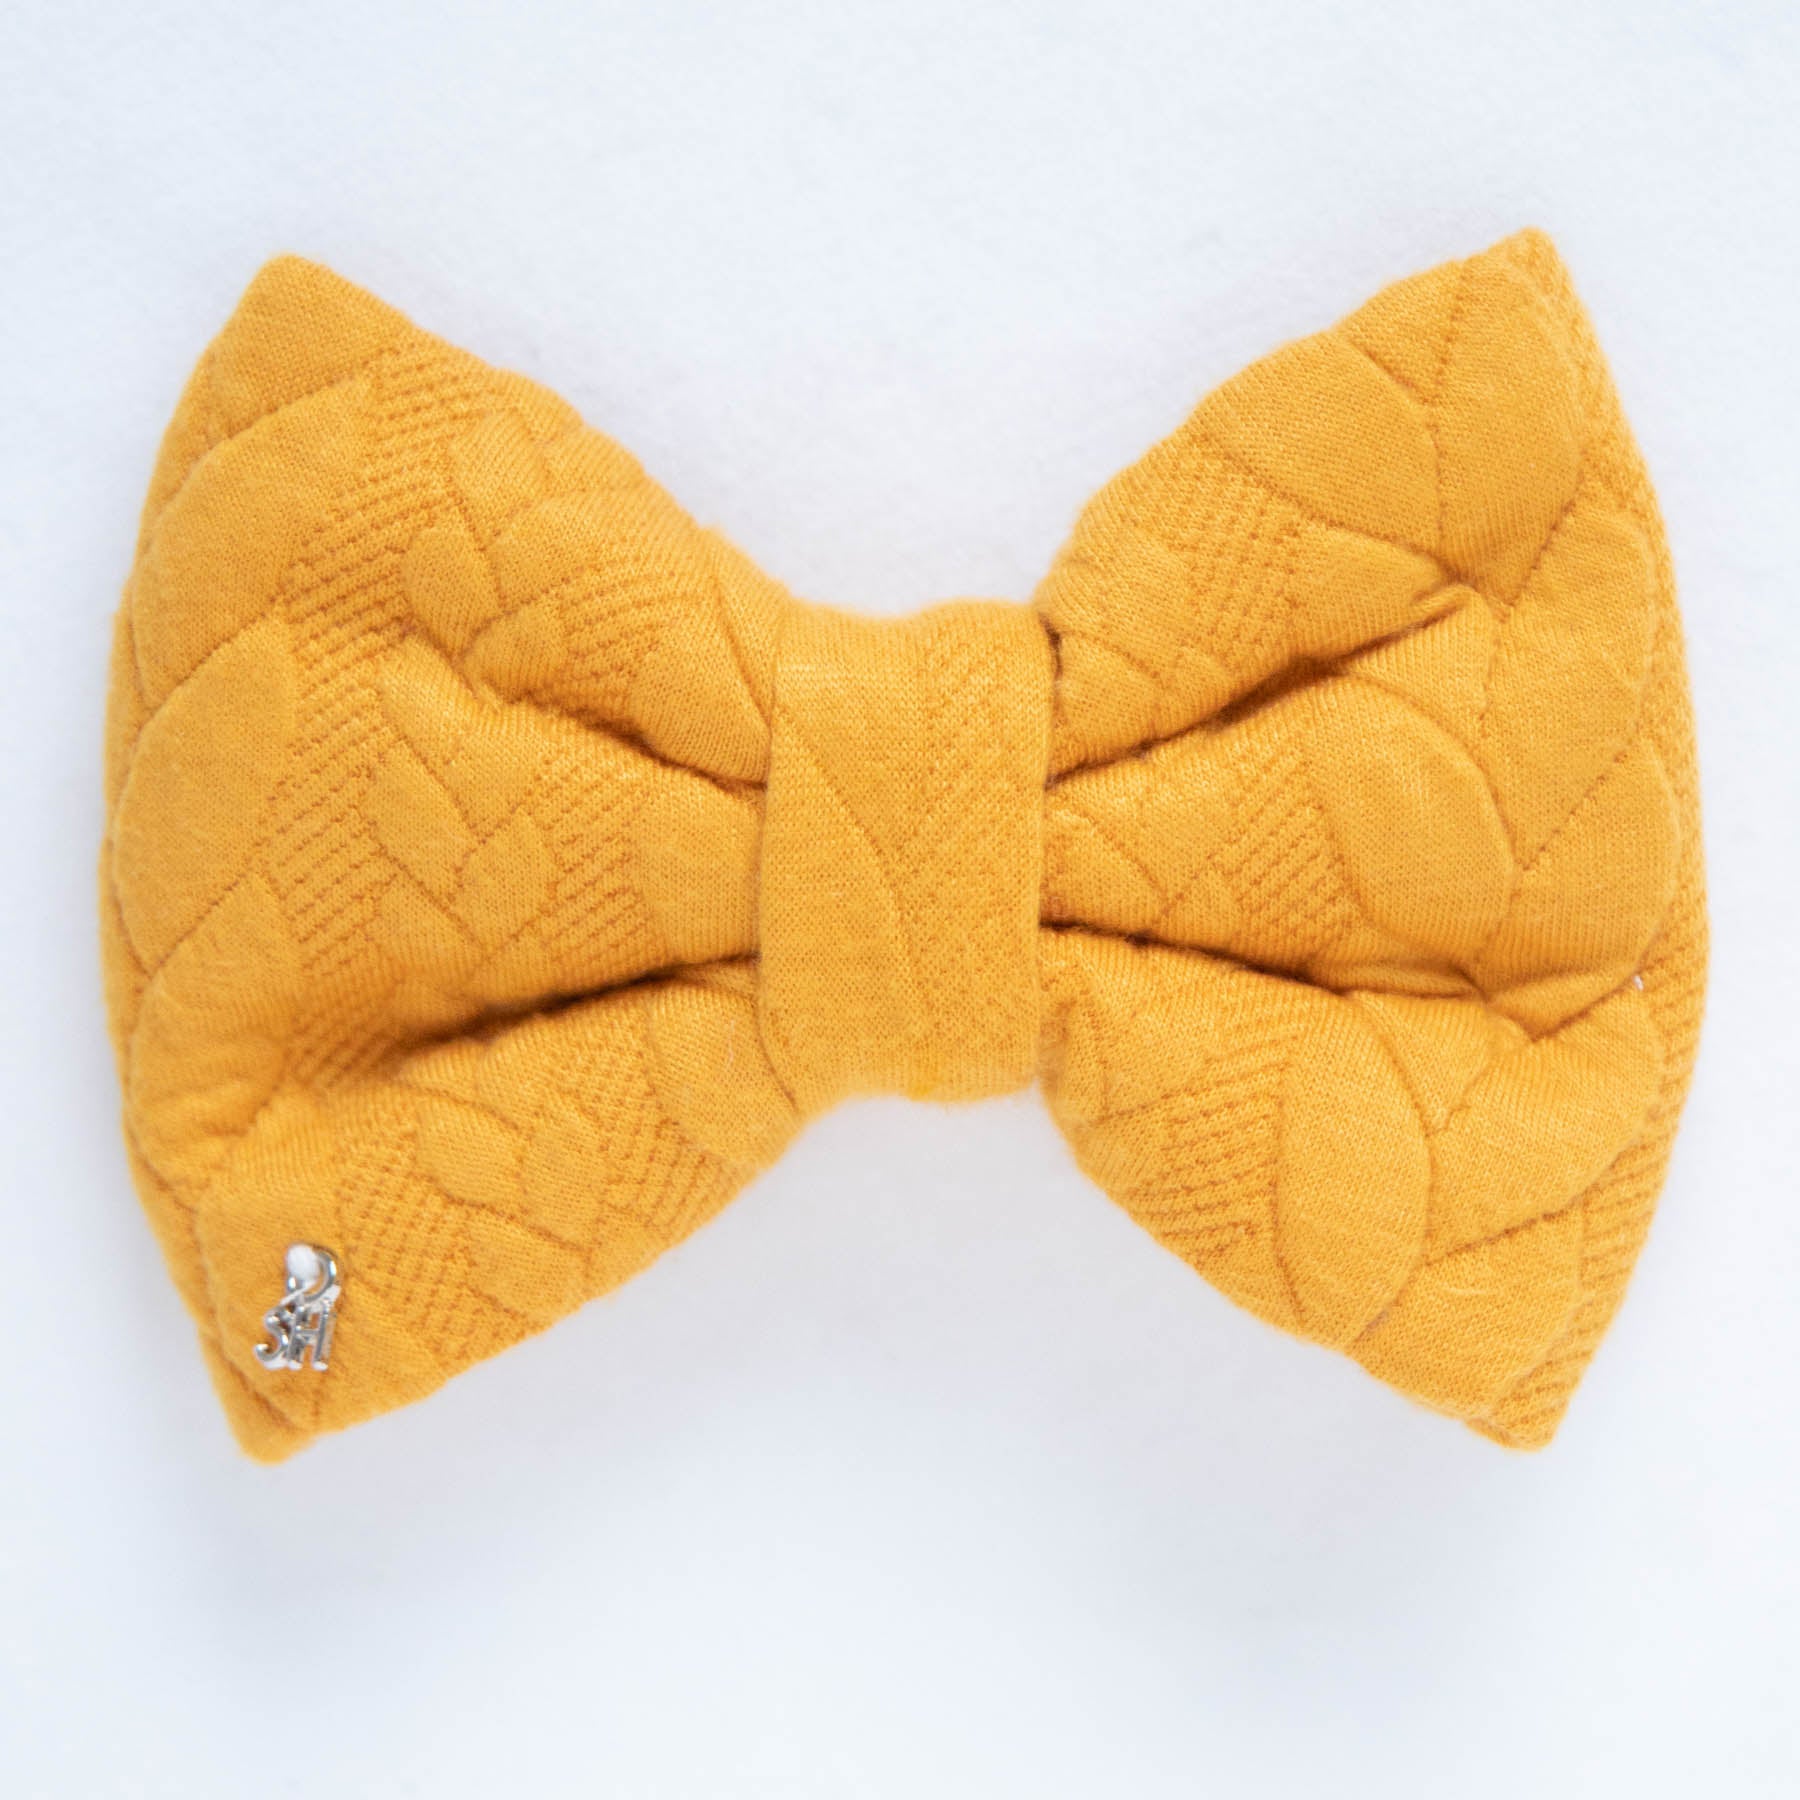 Orche Knit Dog Bow Tie